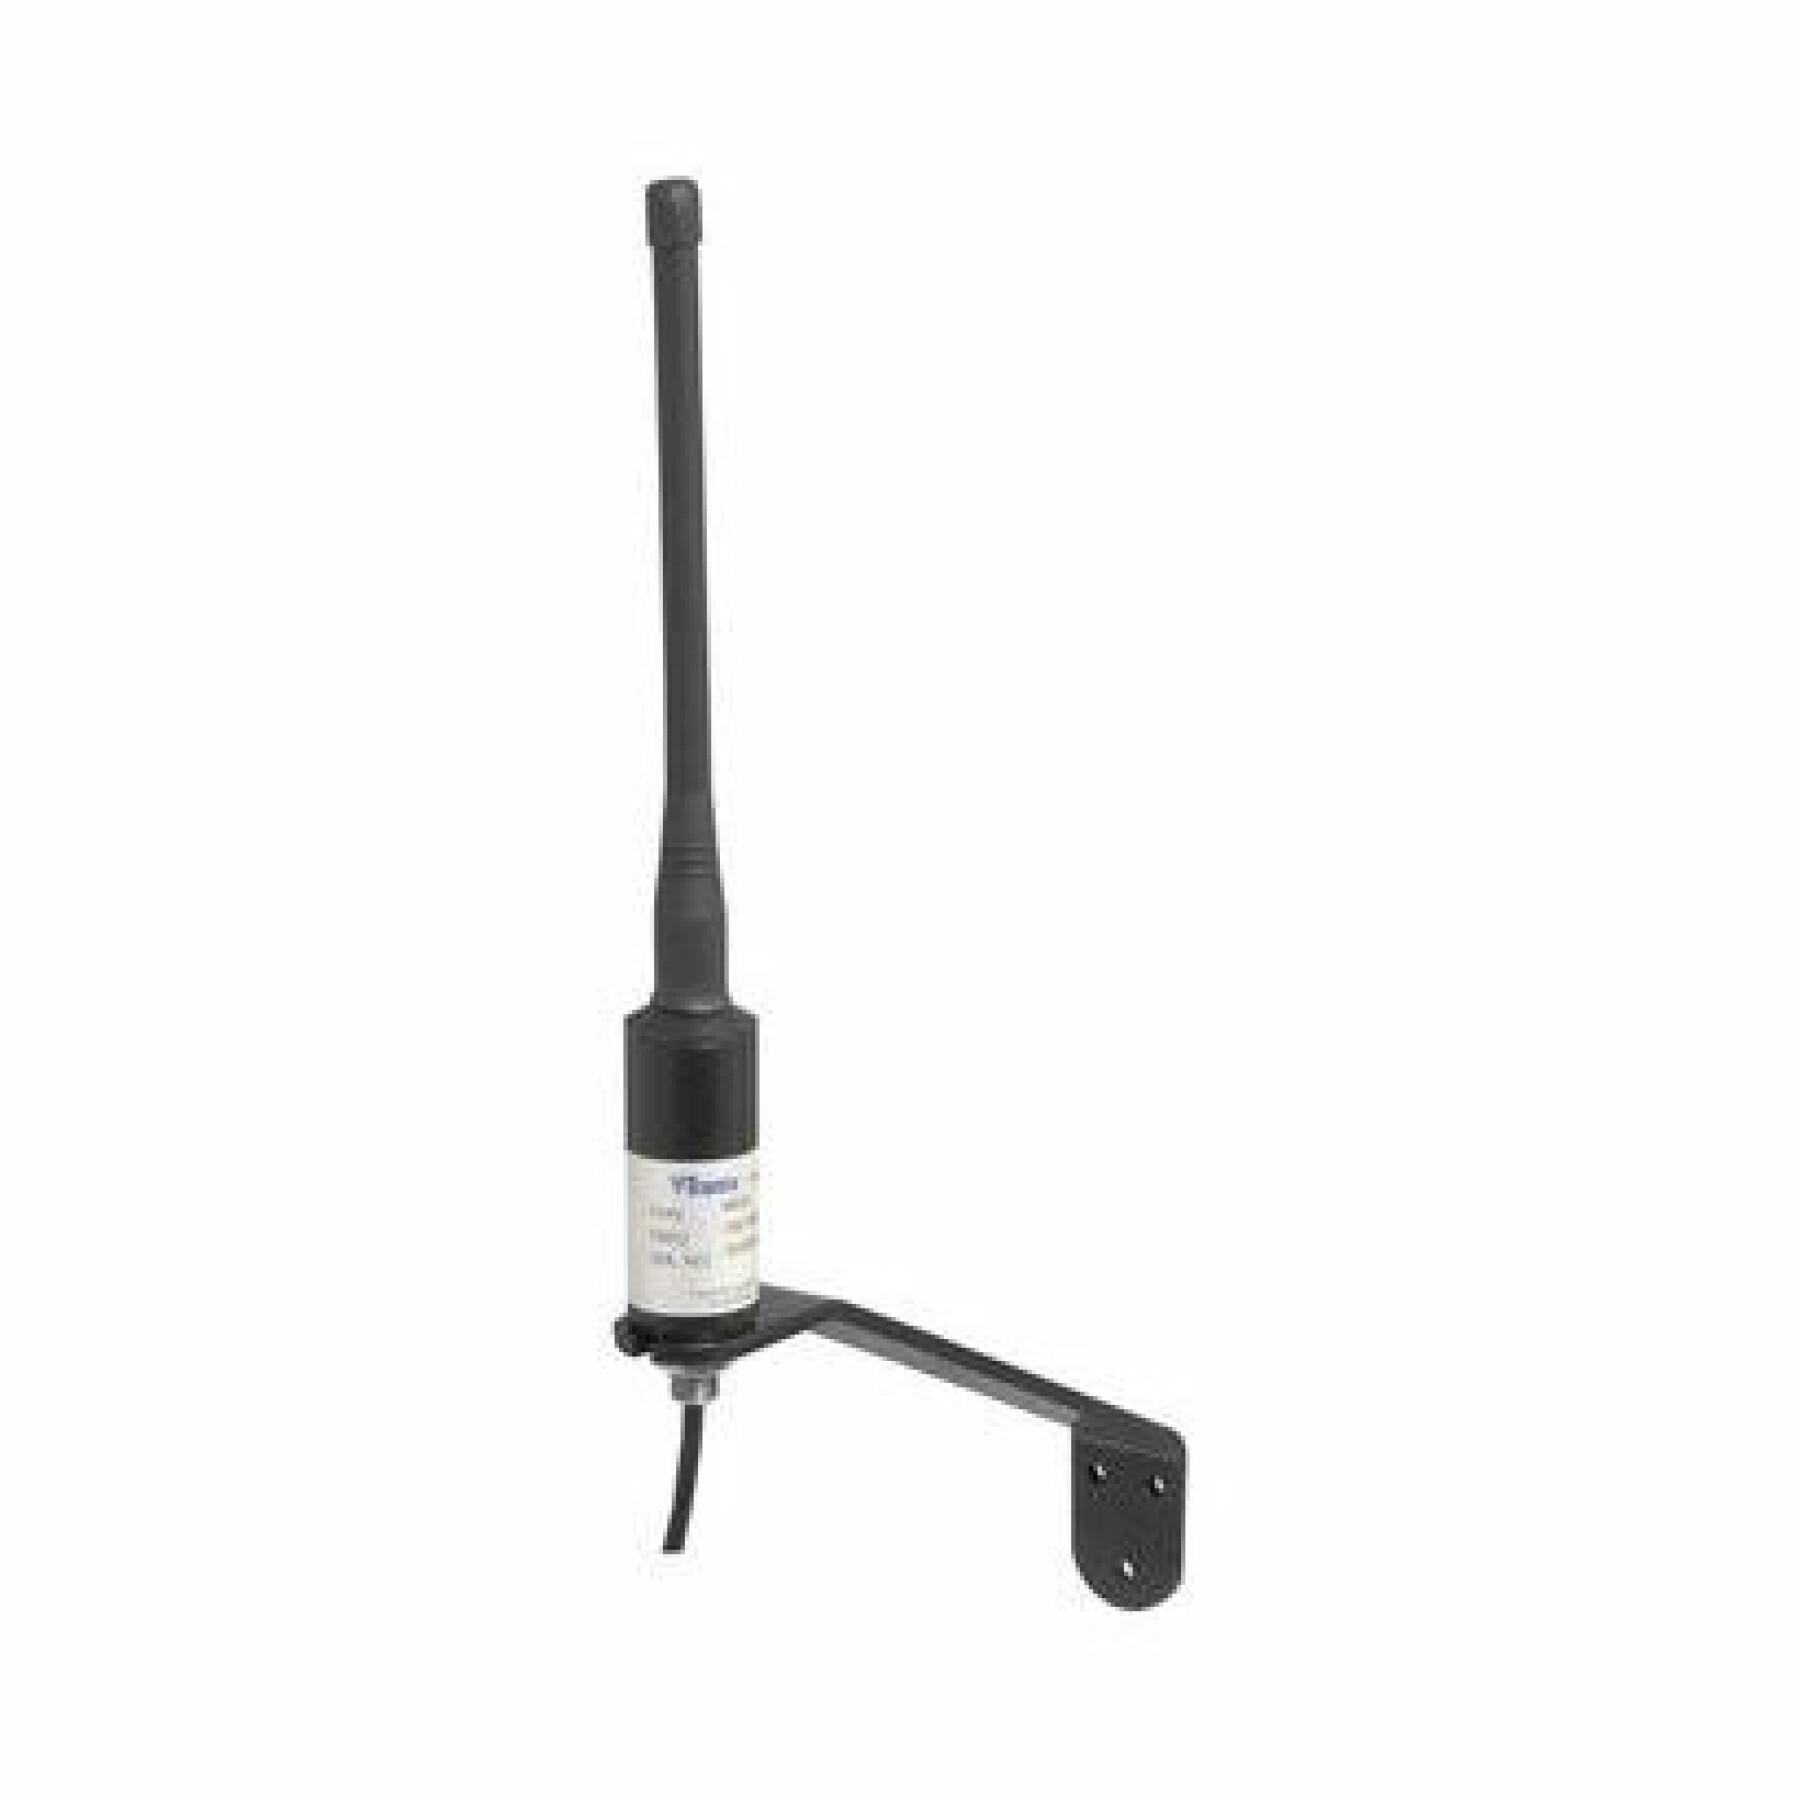 Short helical antenna with reduced dunnage Shakespeare AIS 0.31m - 3dB